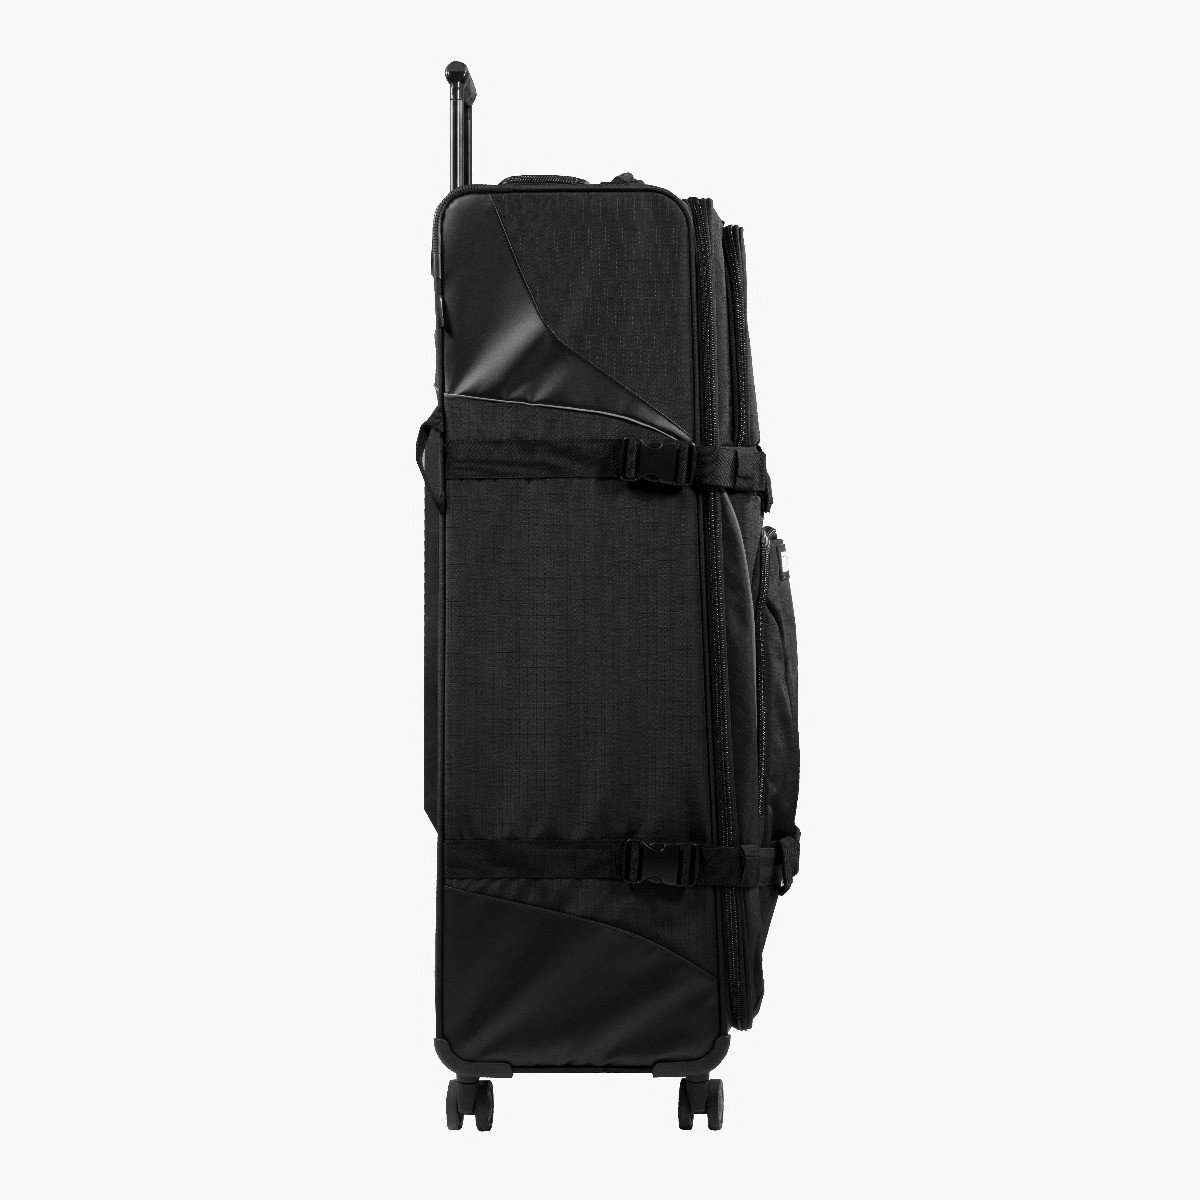 CHECK-IN LARGE LUGGAGE TROLLEY 110L - 4 WD